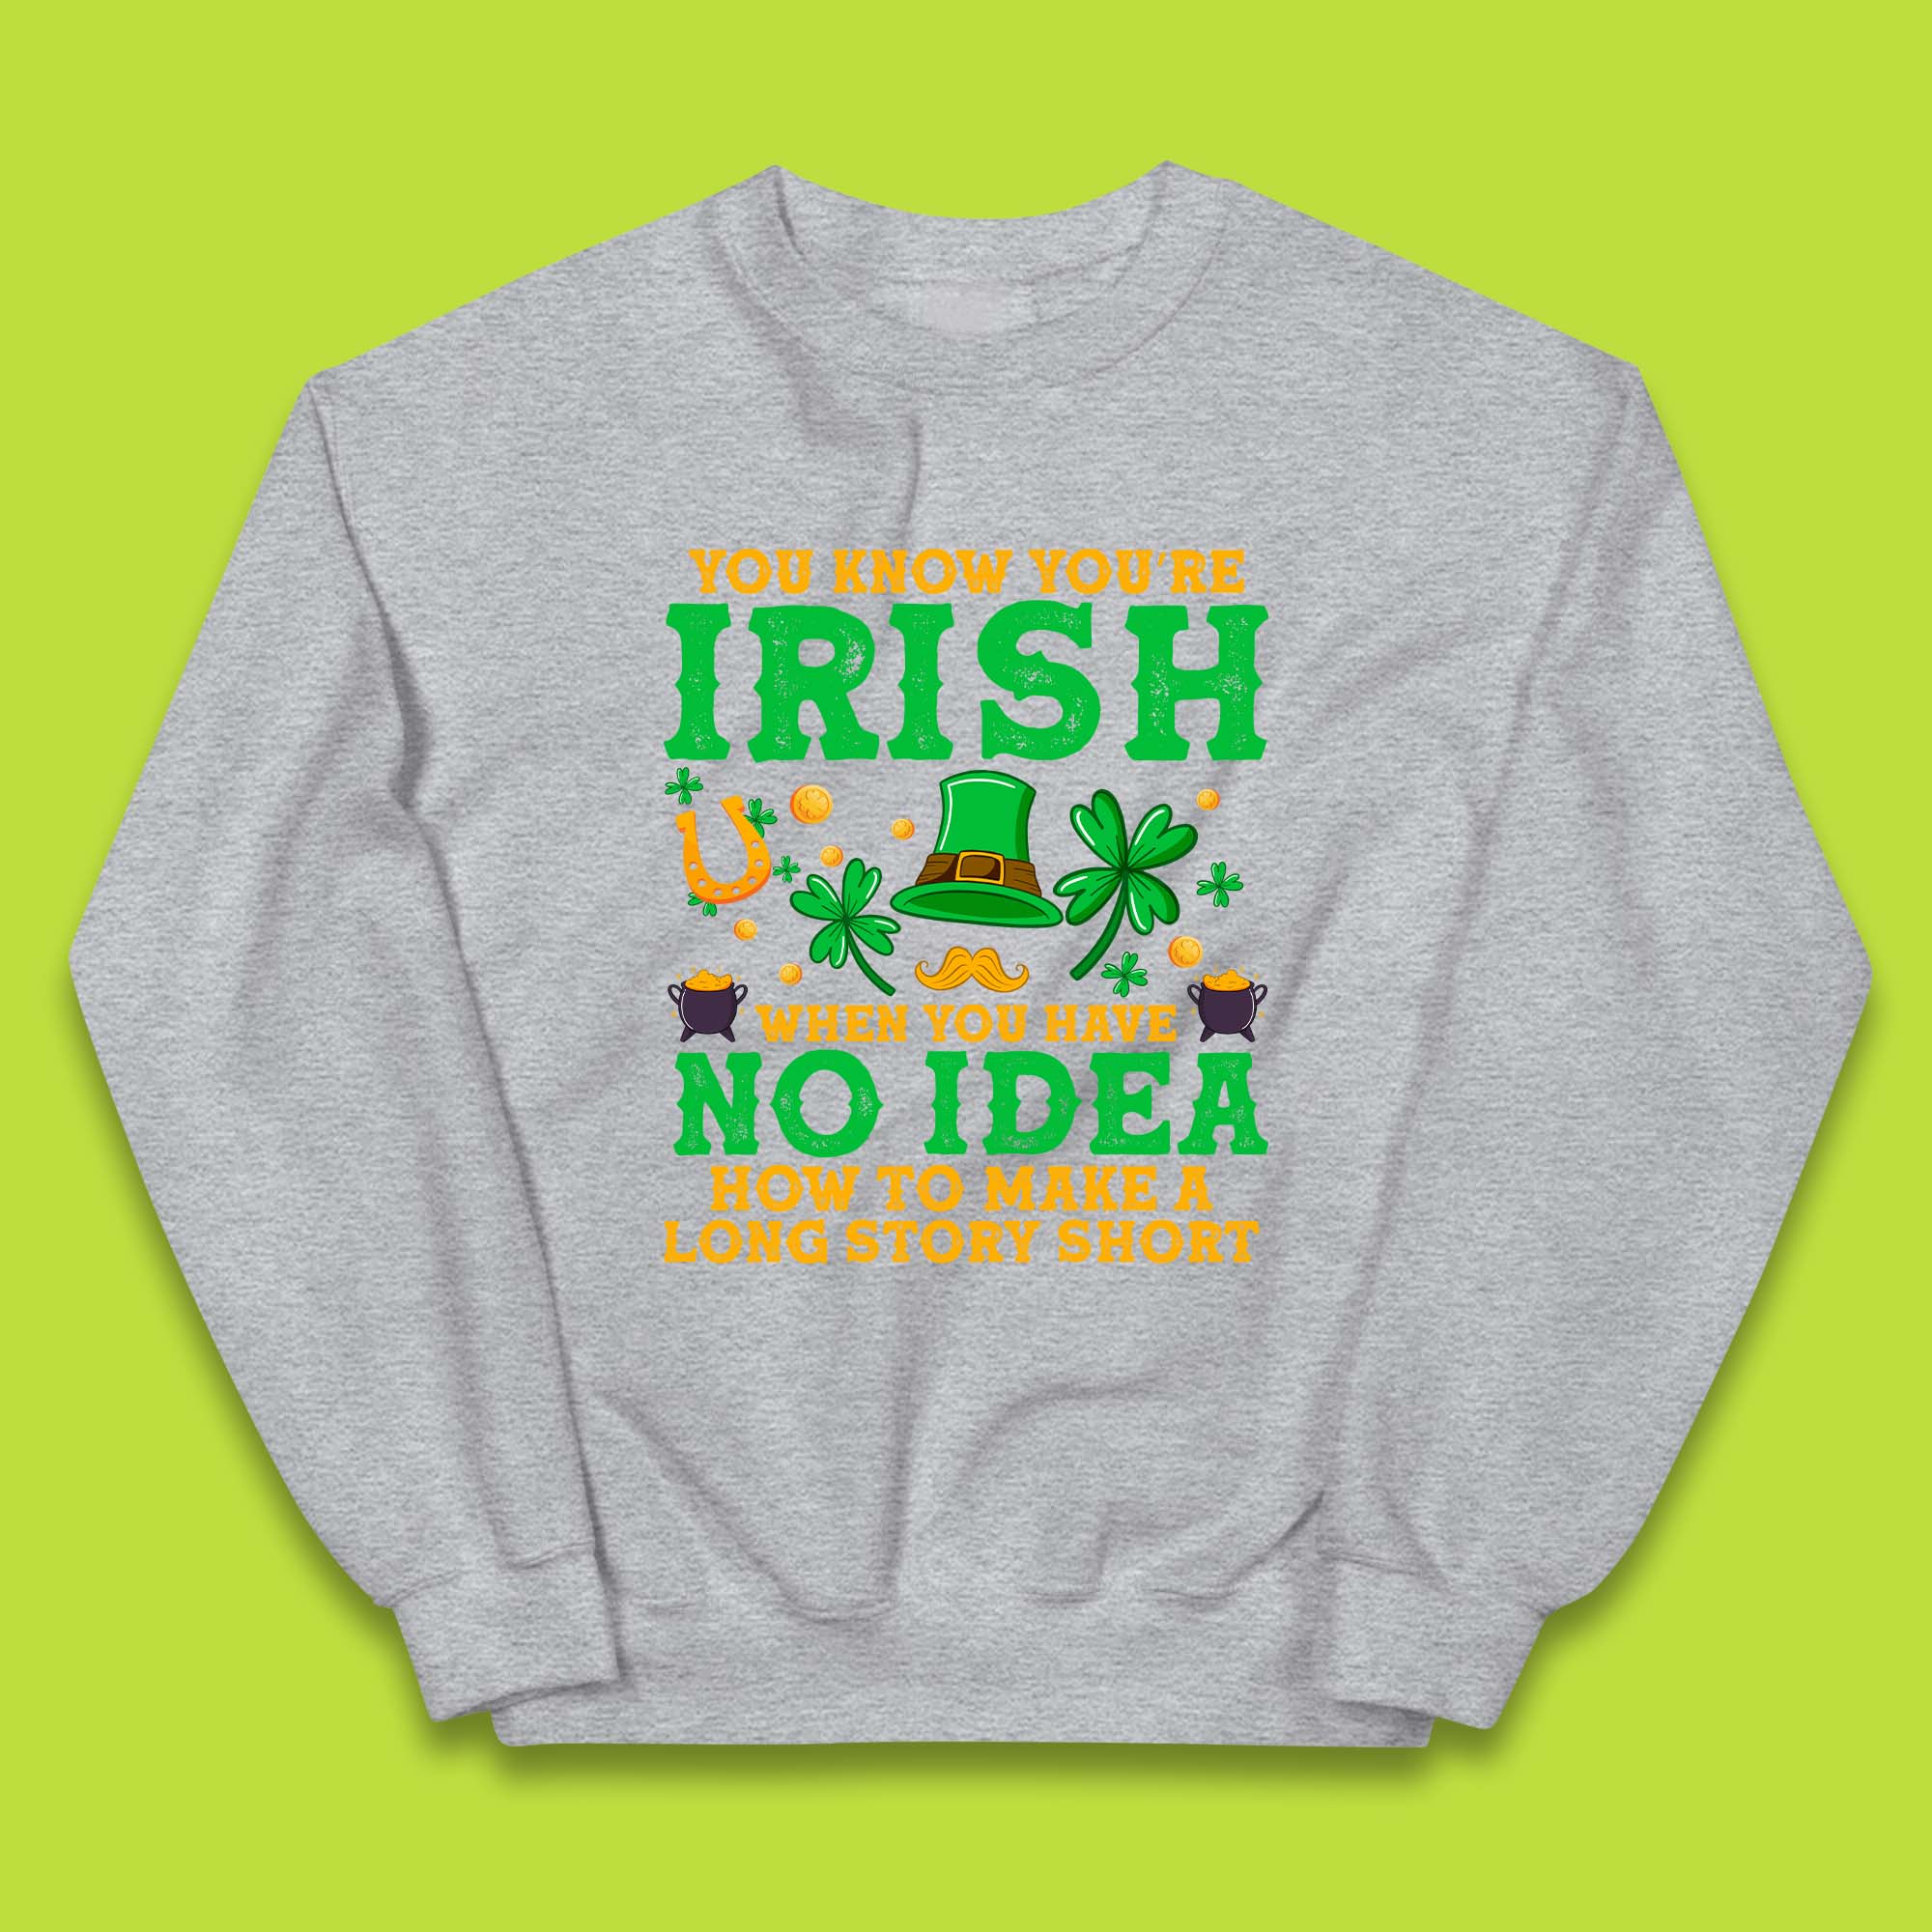 You Know You're Irish Kids Jumper